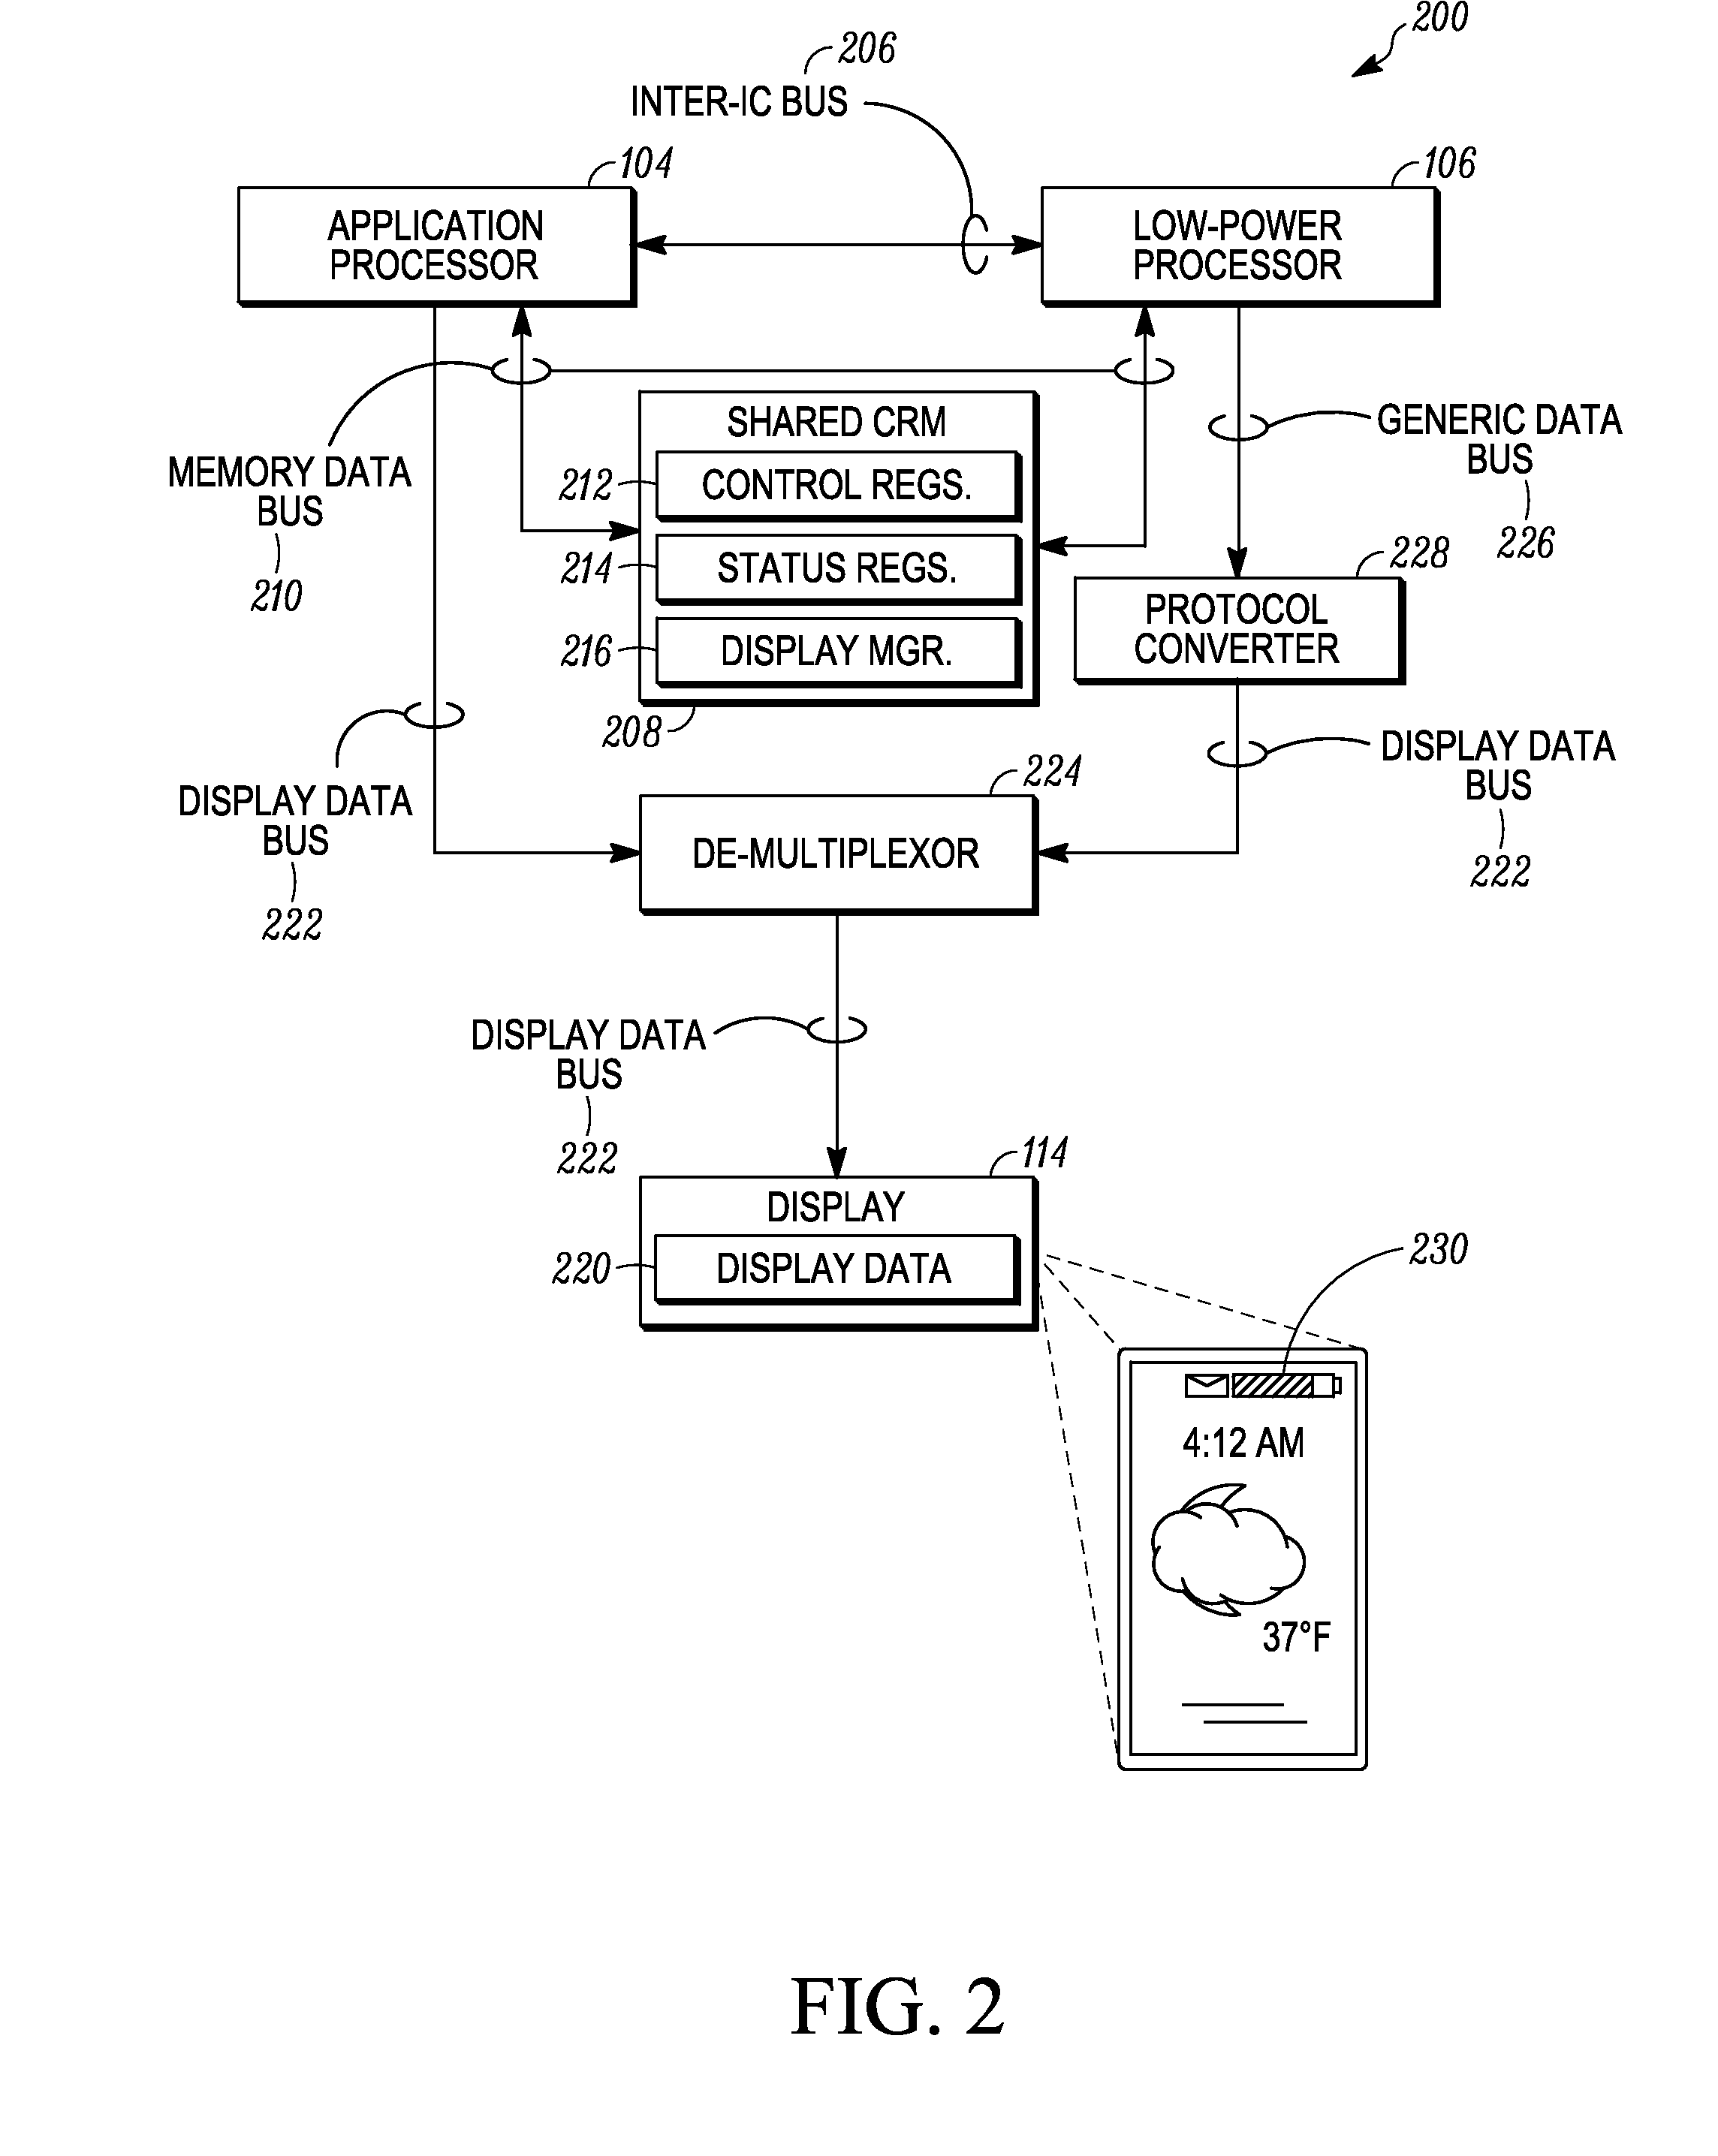 Method and apparatus for displaying potentially private information